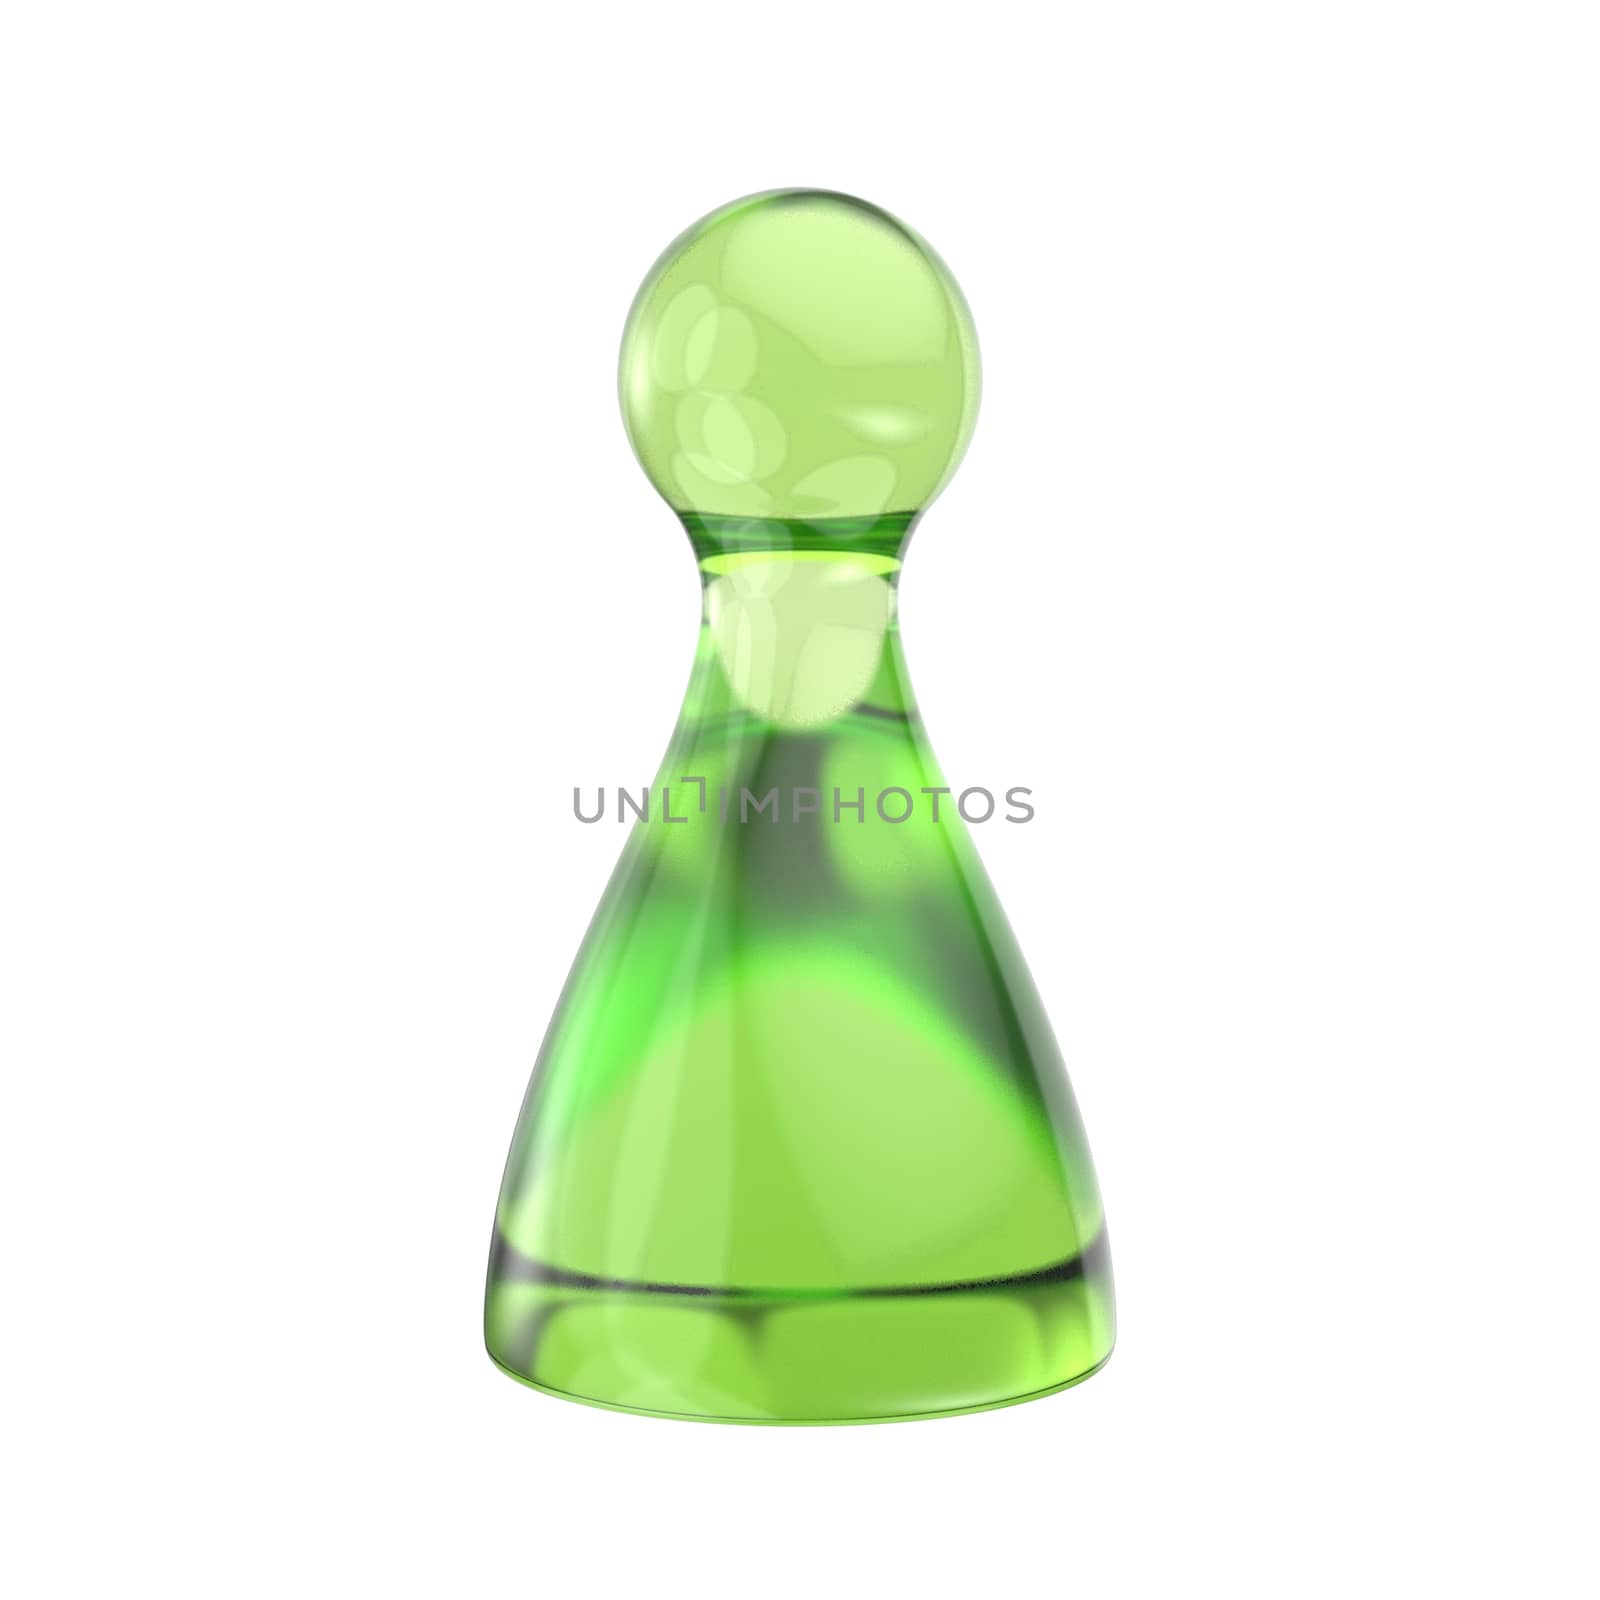 Green game figure. 3D render illustration isolated on white background